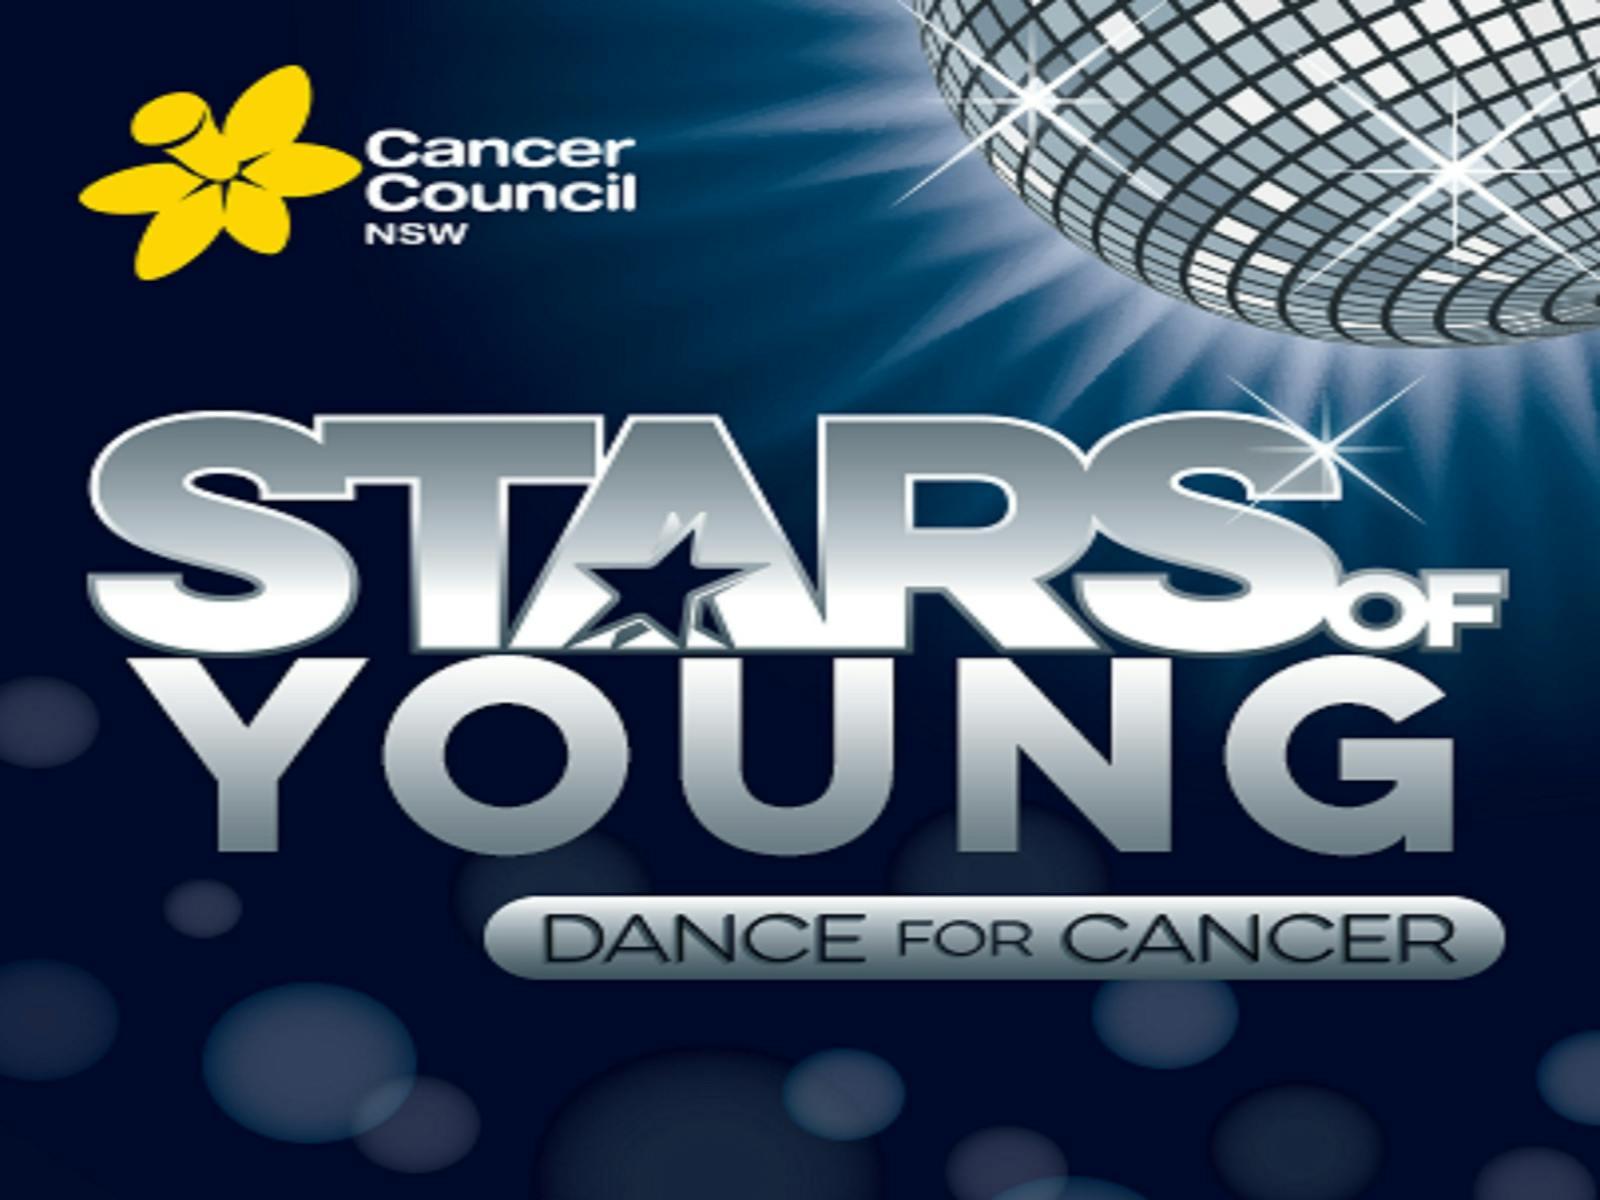 Image for Stars of Young- Cancer Council Fundraiser